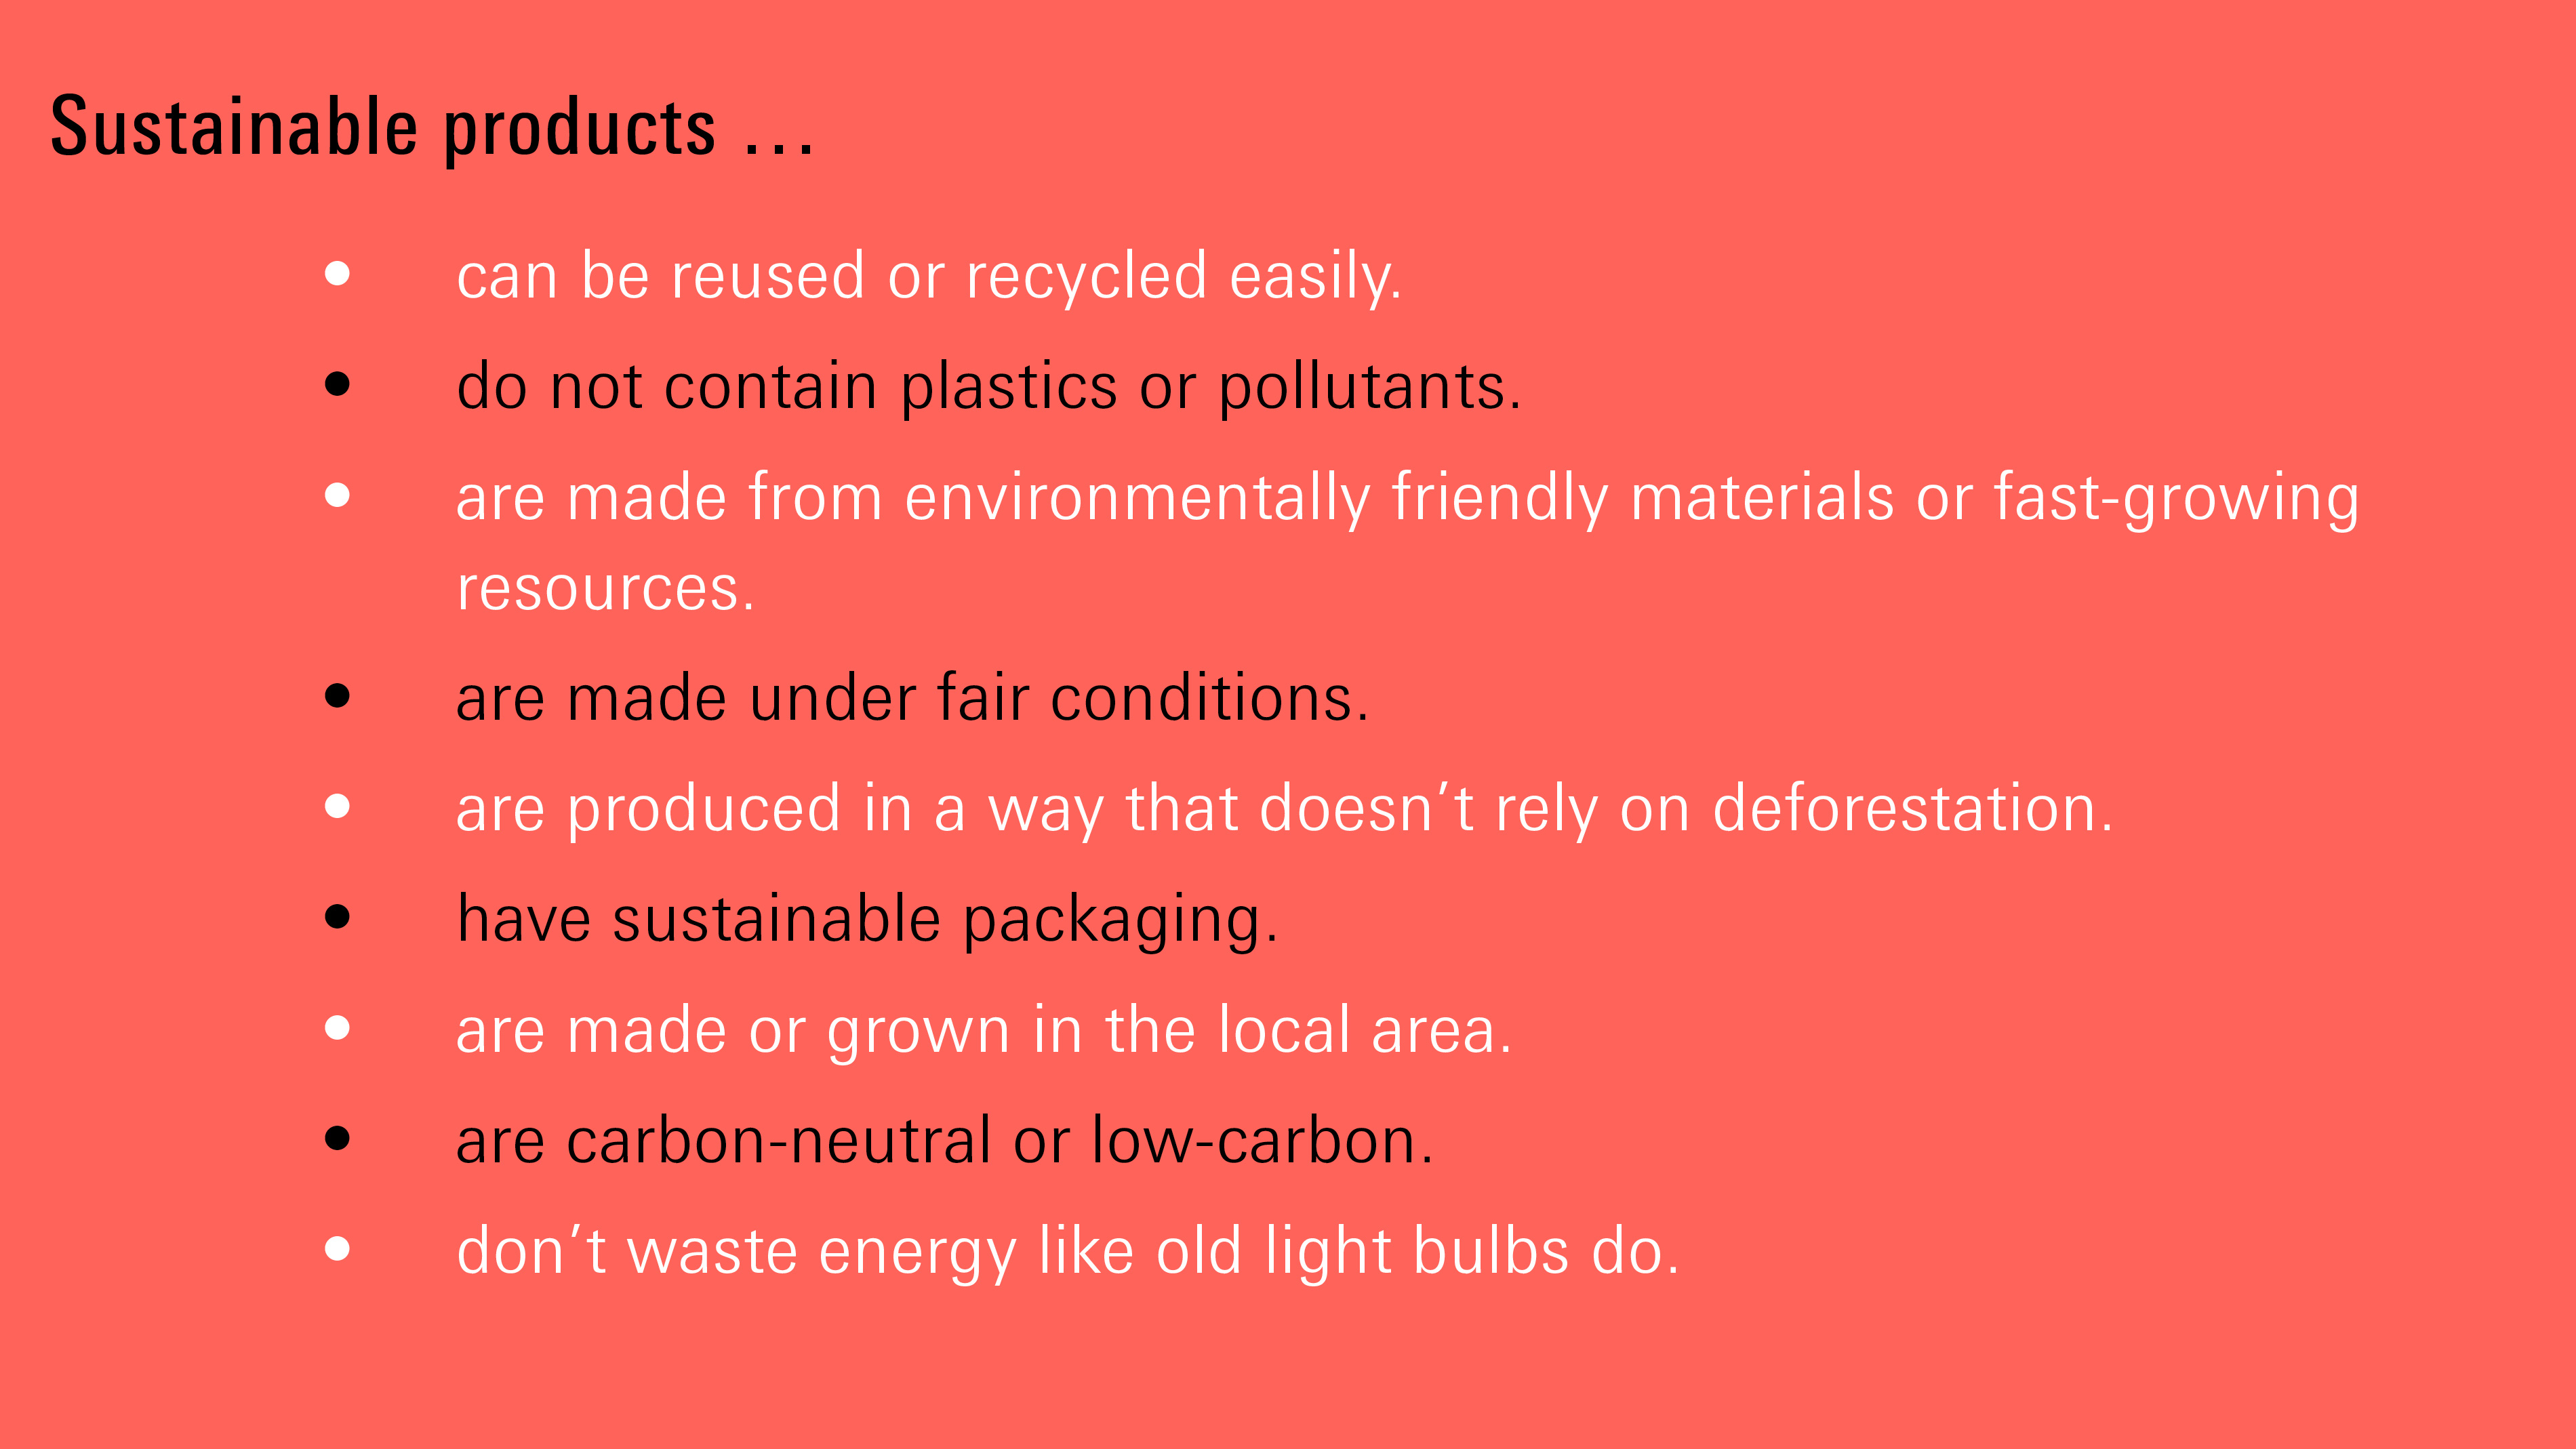 List of sustainable products